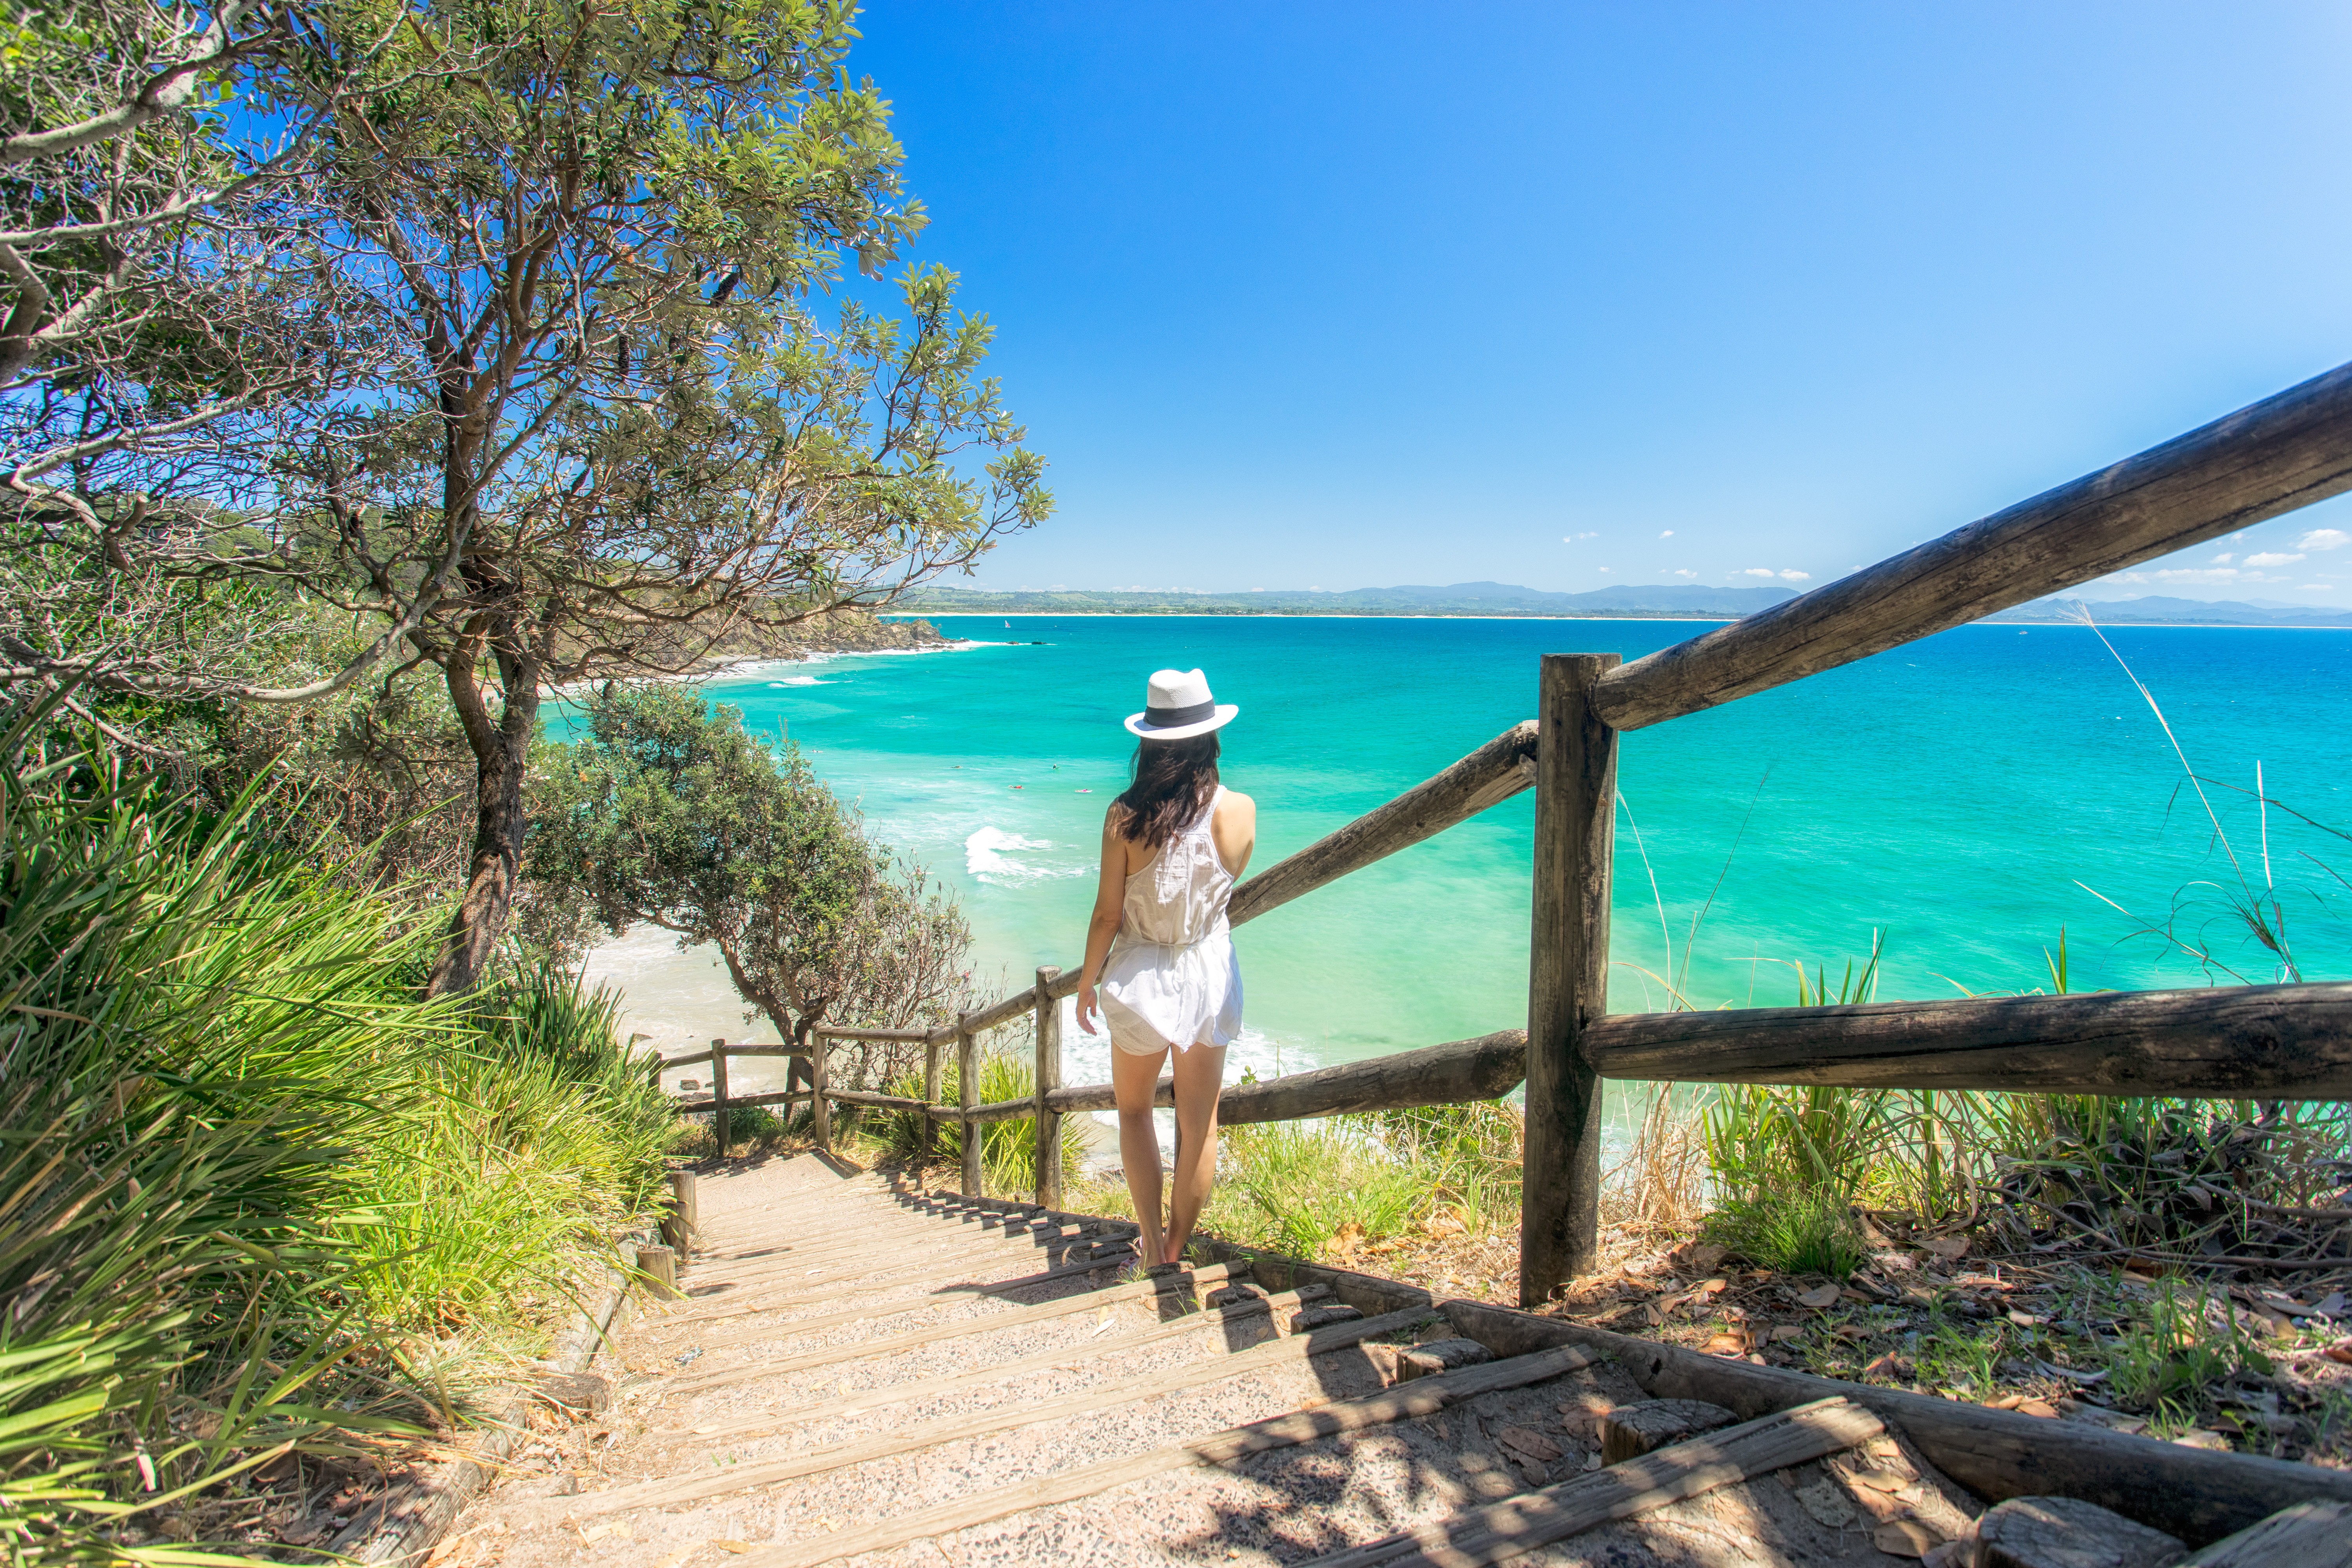 Byron Bay on Australia's east coast is home to a number of creatives who have left Australia’s big cities to set up their businesses. Photo: Shutterstock